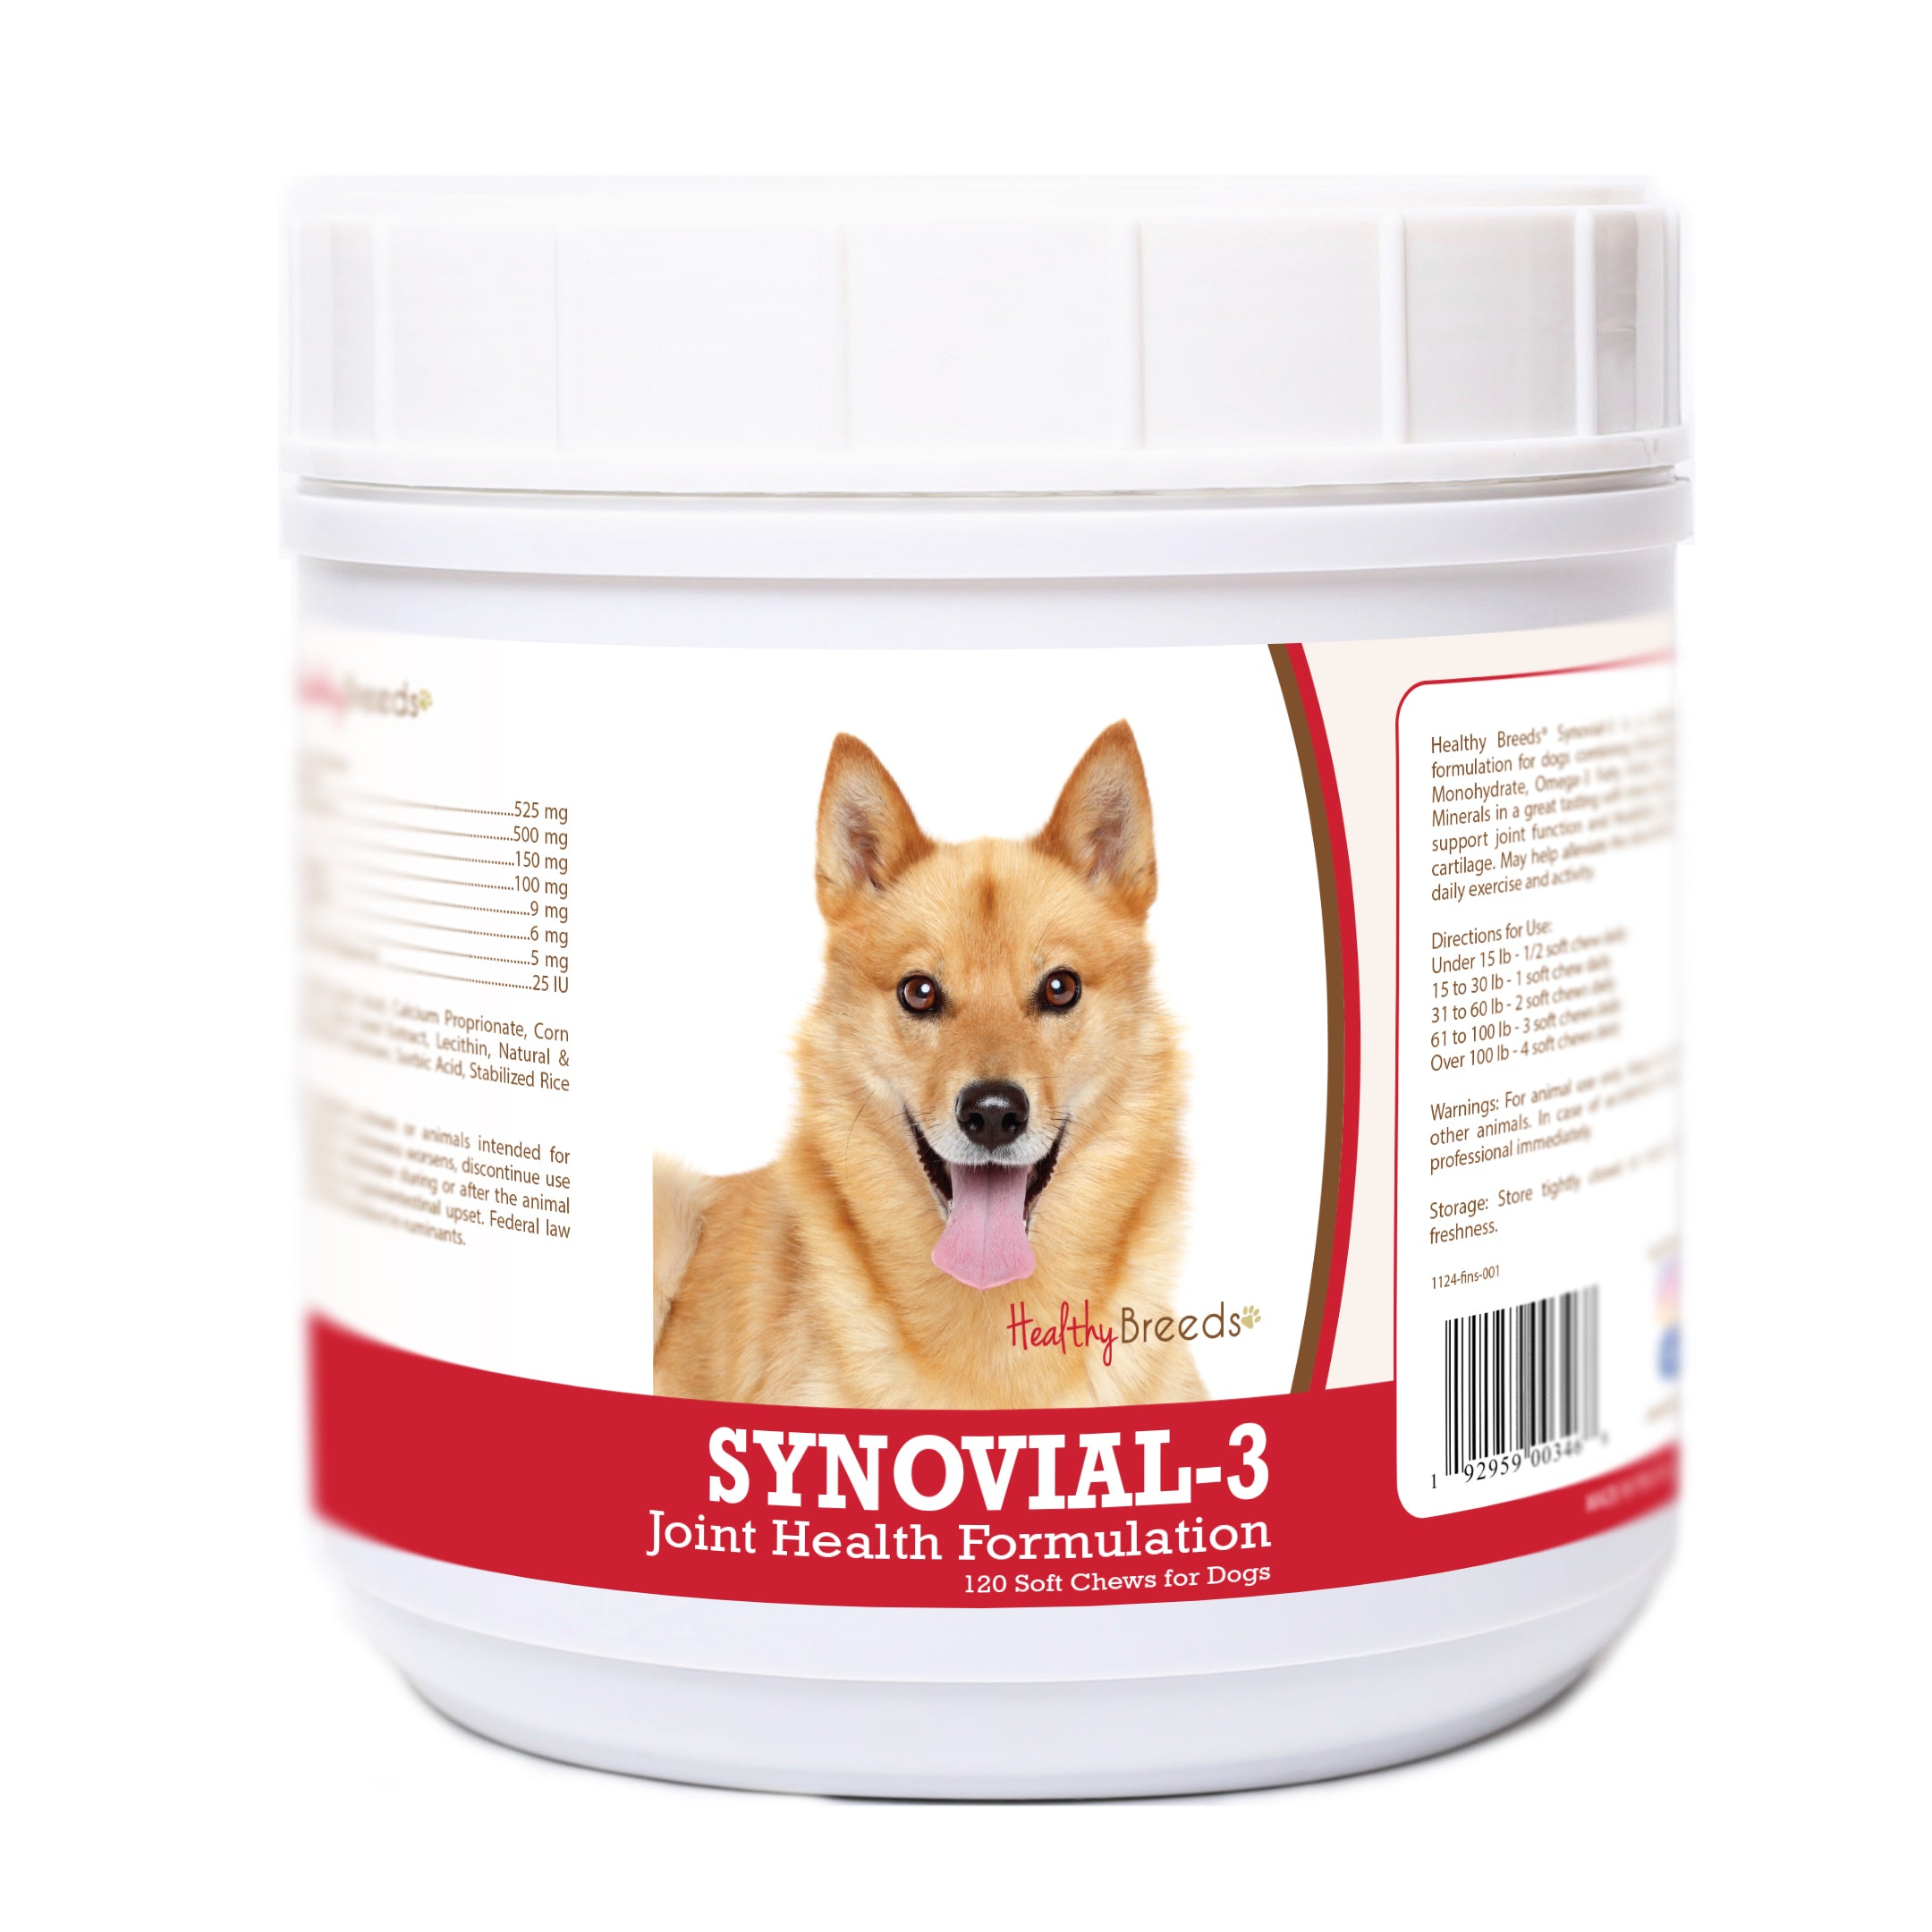 Finnish Spitz Synovial-3 Joint Health Formulation Soft Chews 120 Count